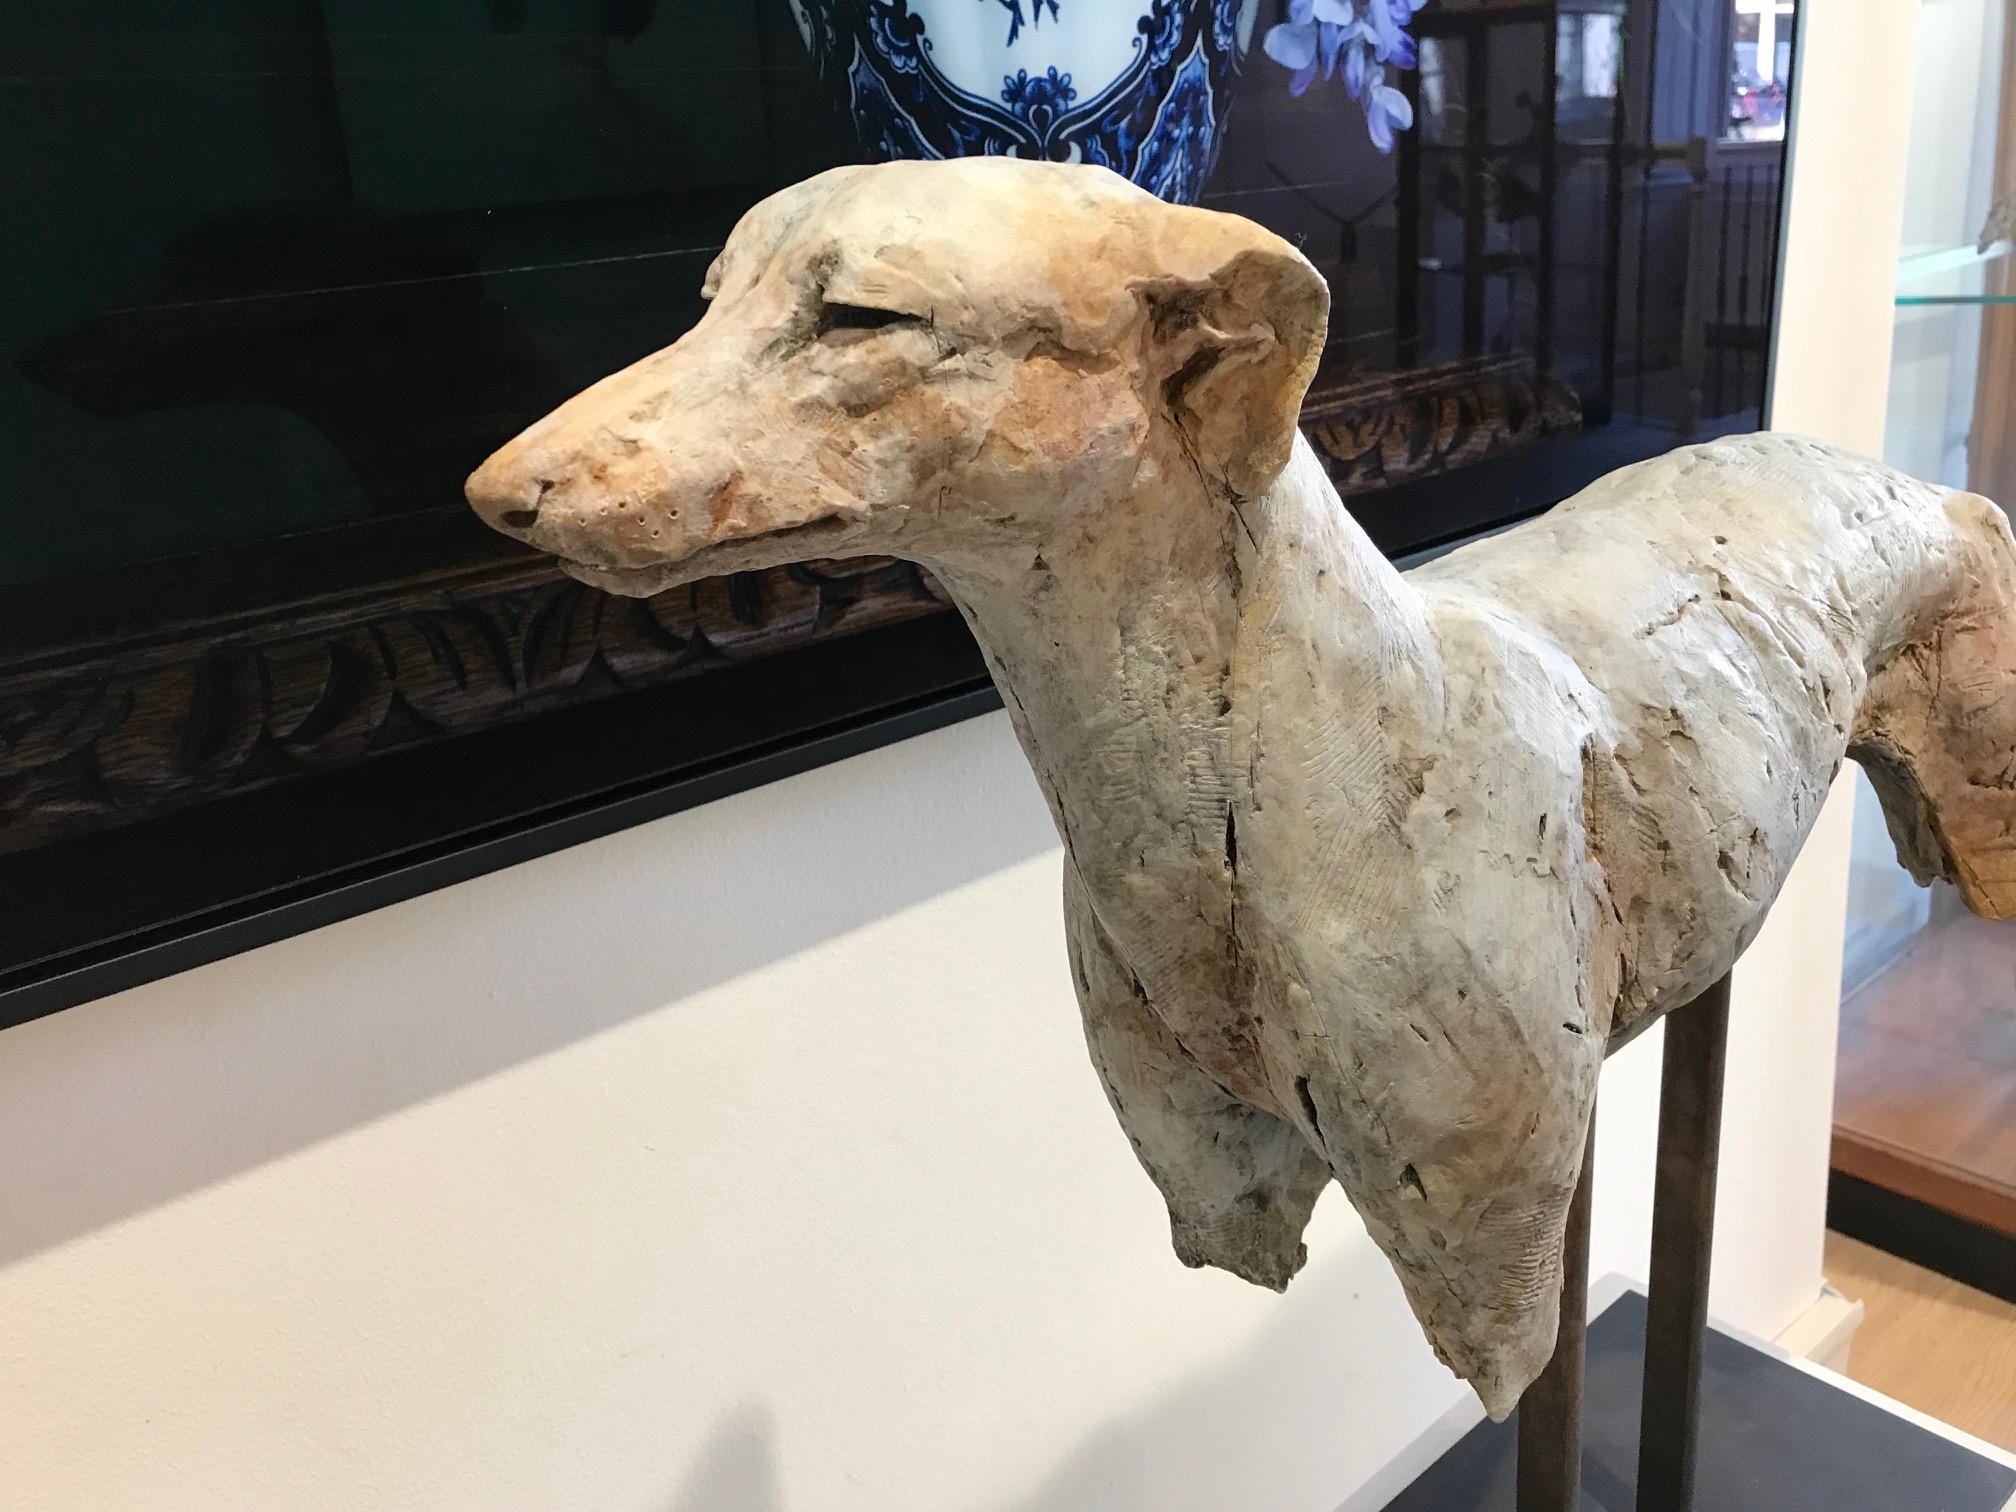 Nichola Theakston (1967) has established herself as one of the UK’s foremost contemporary sculptors working within the animal genre. 

With the ''Sighthound'' Nichola shows how exquisite she can capture the feelings and expressions in an animal. The